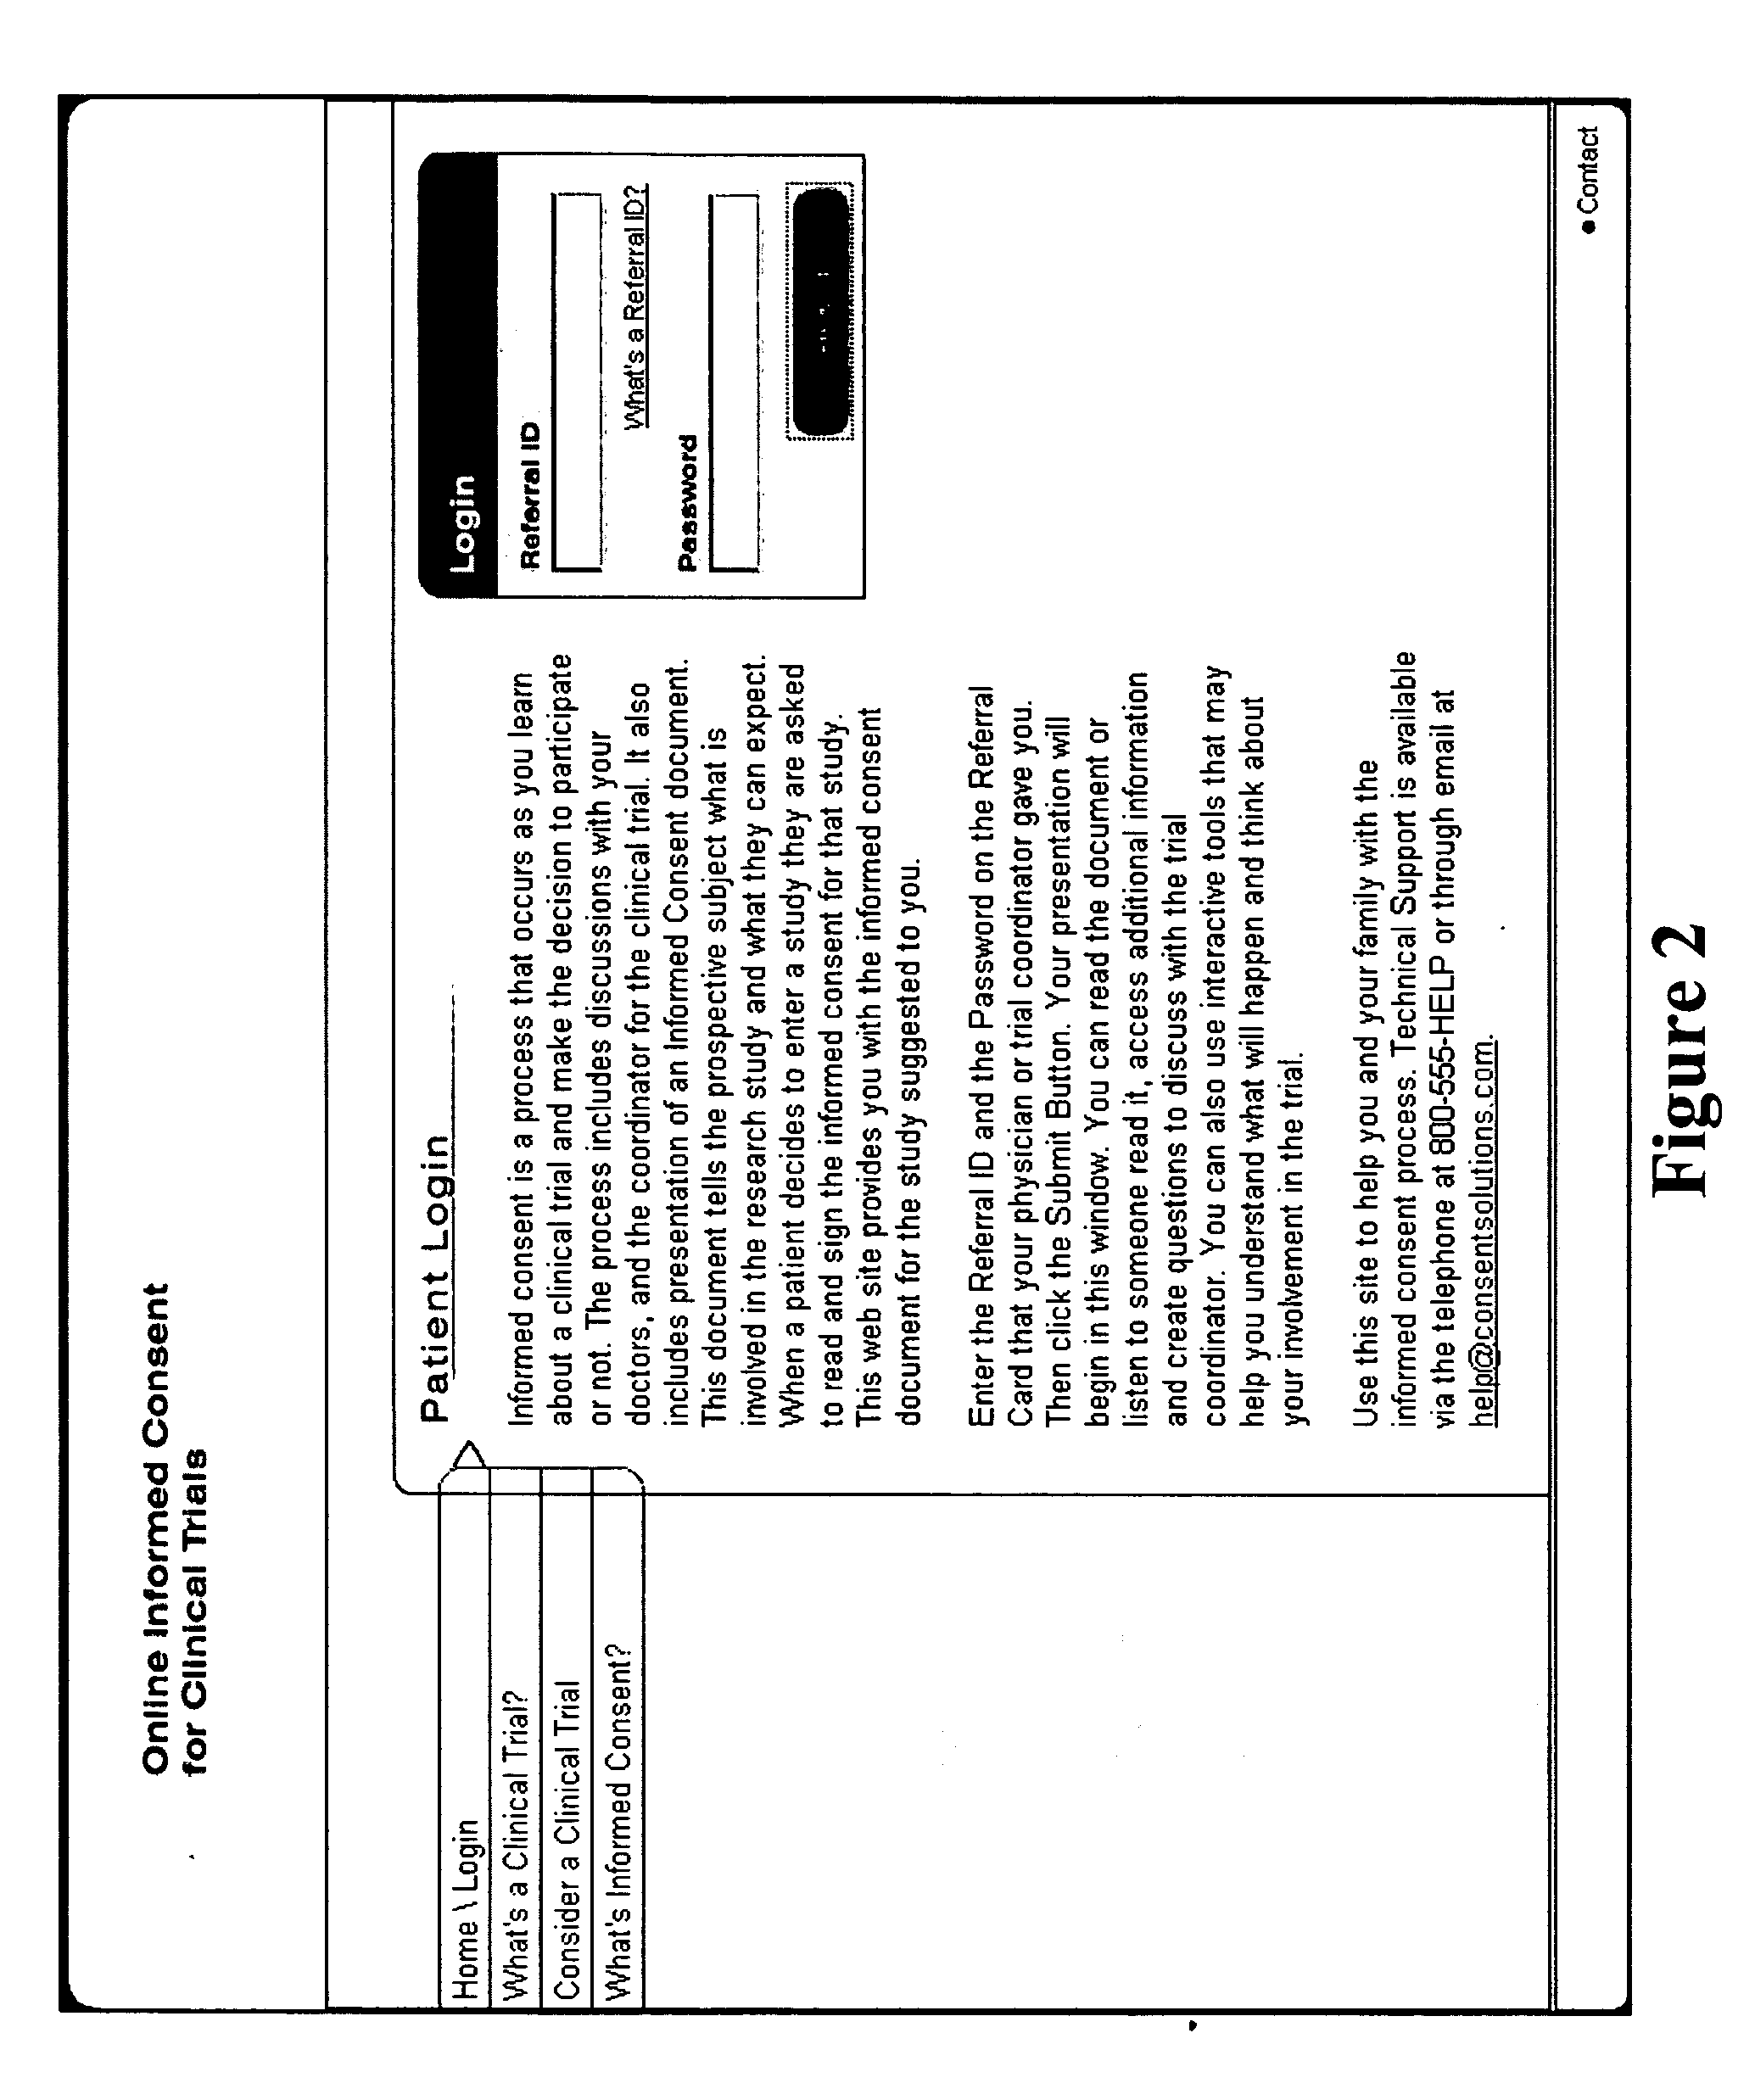 Healthcare informed consent system and methods